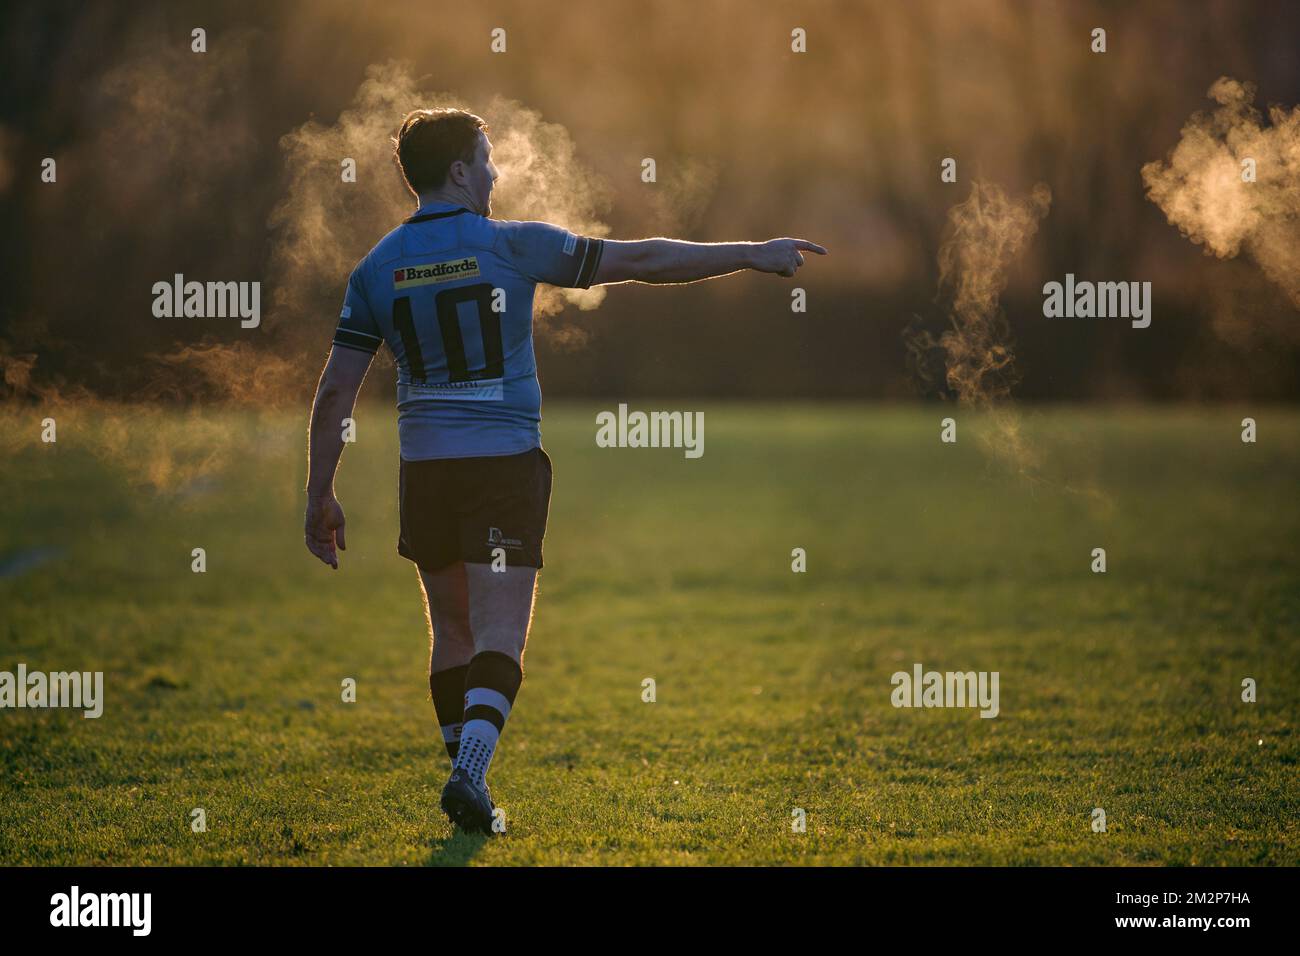 Rugby players in action Stock Photo